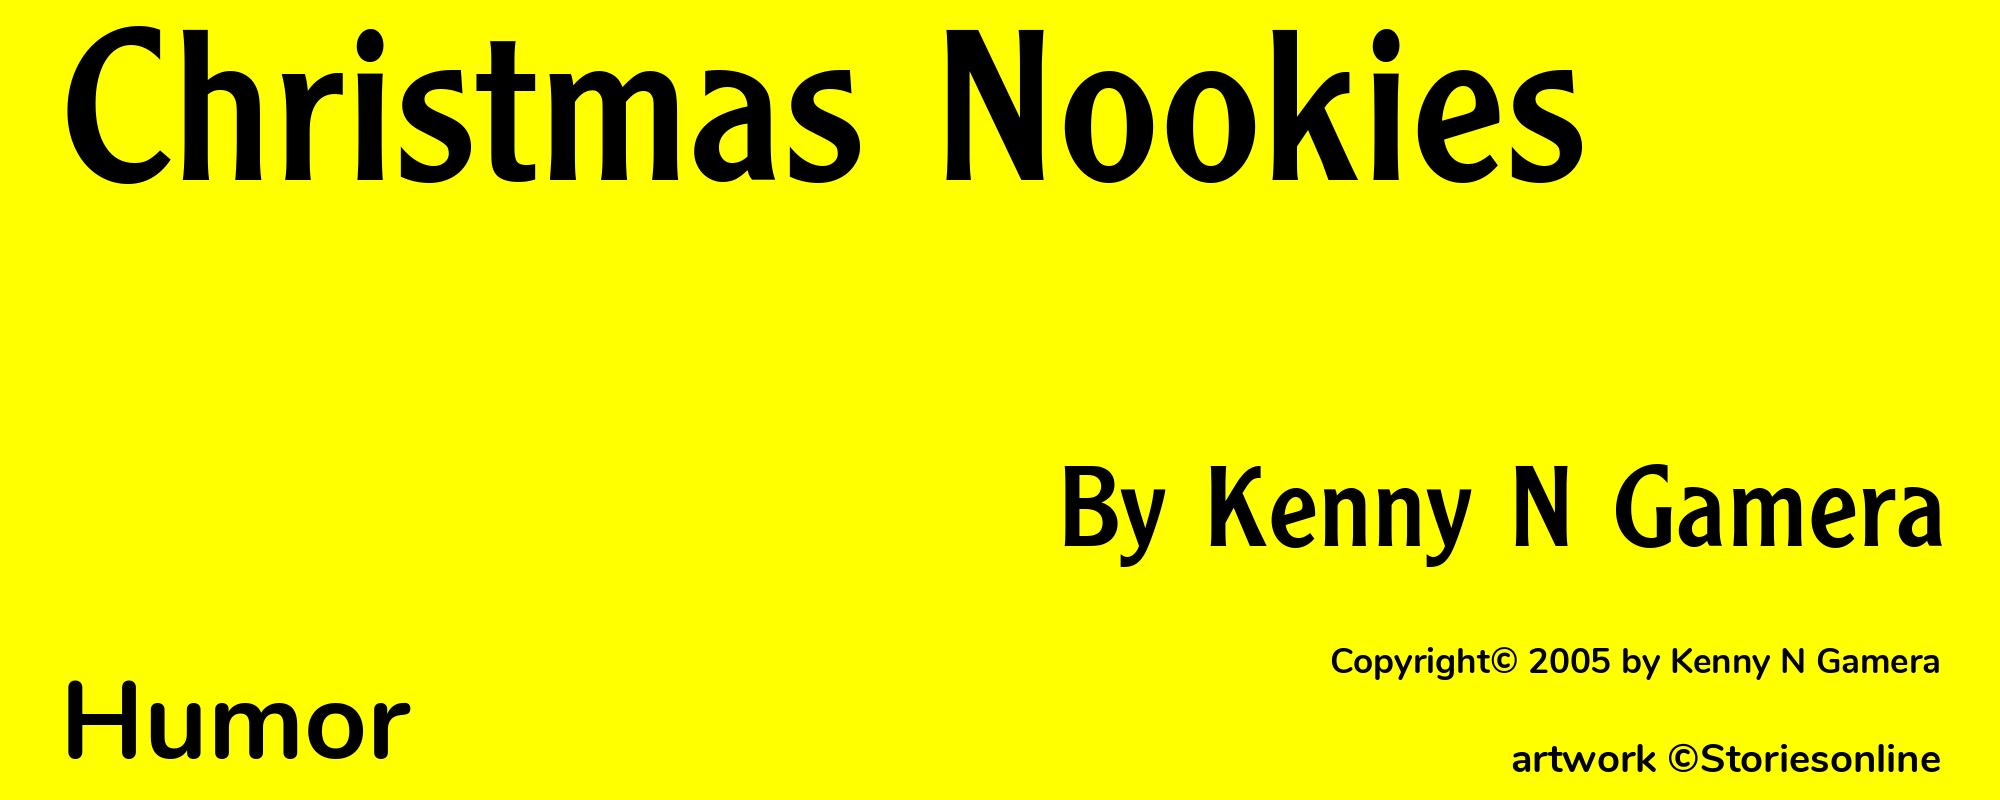 Christmas Nookies - Cover